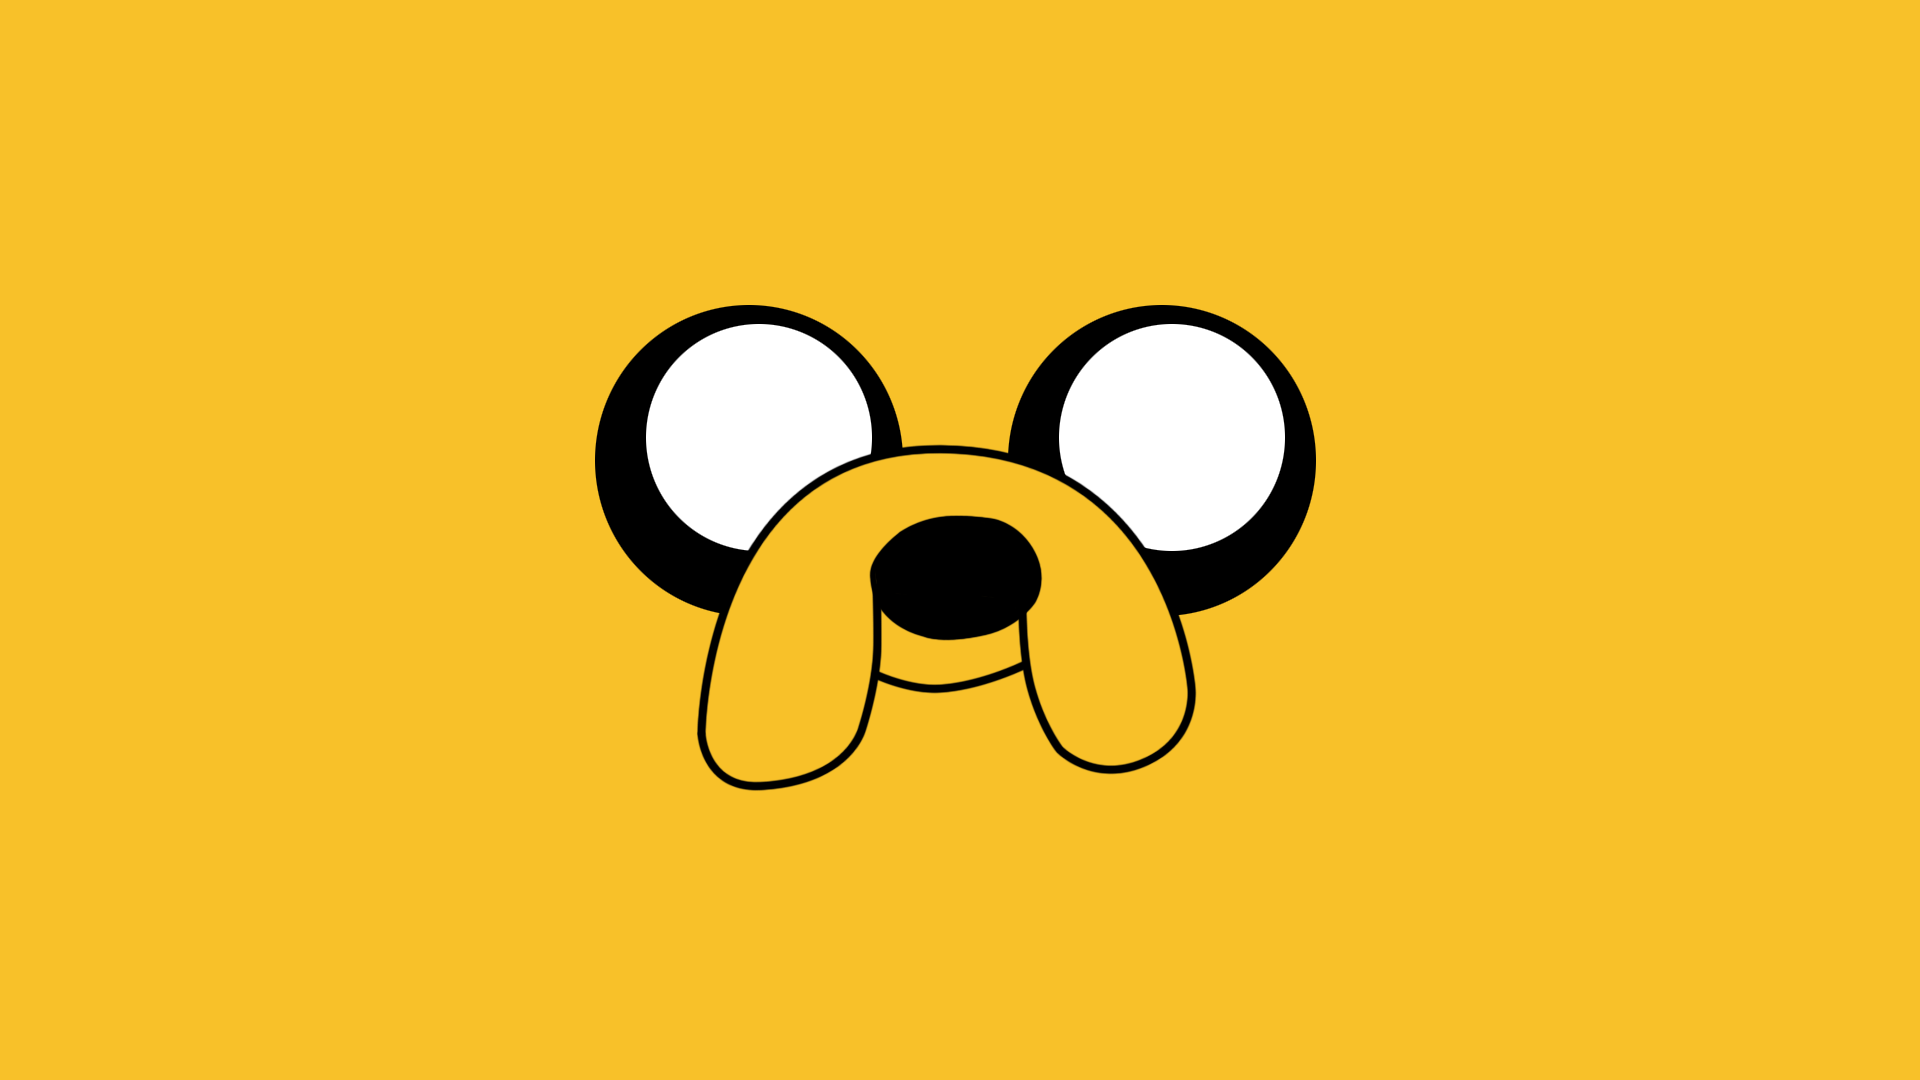 General 1920x1080 Adventure Time Jake the Dog yellow background yellow simple background cartoon TV series